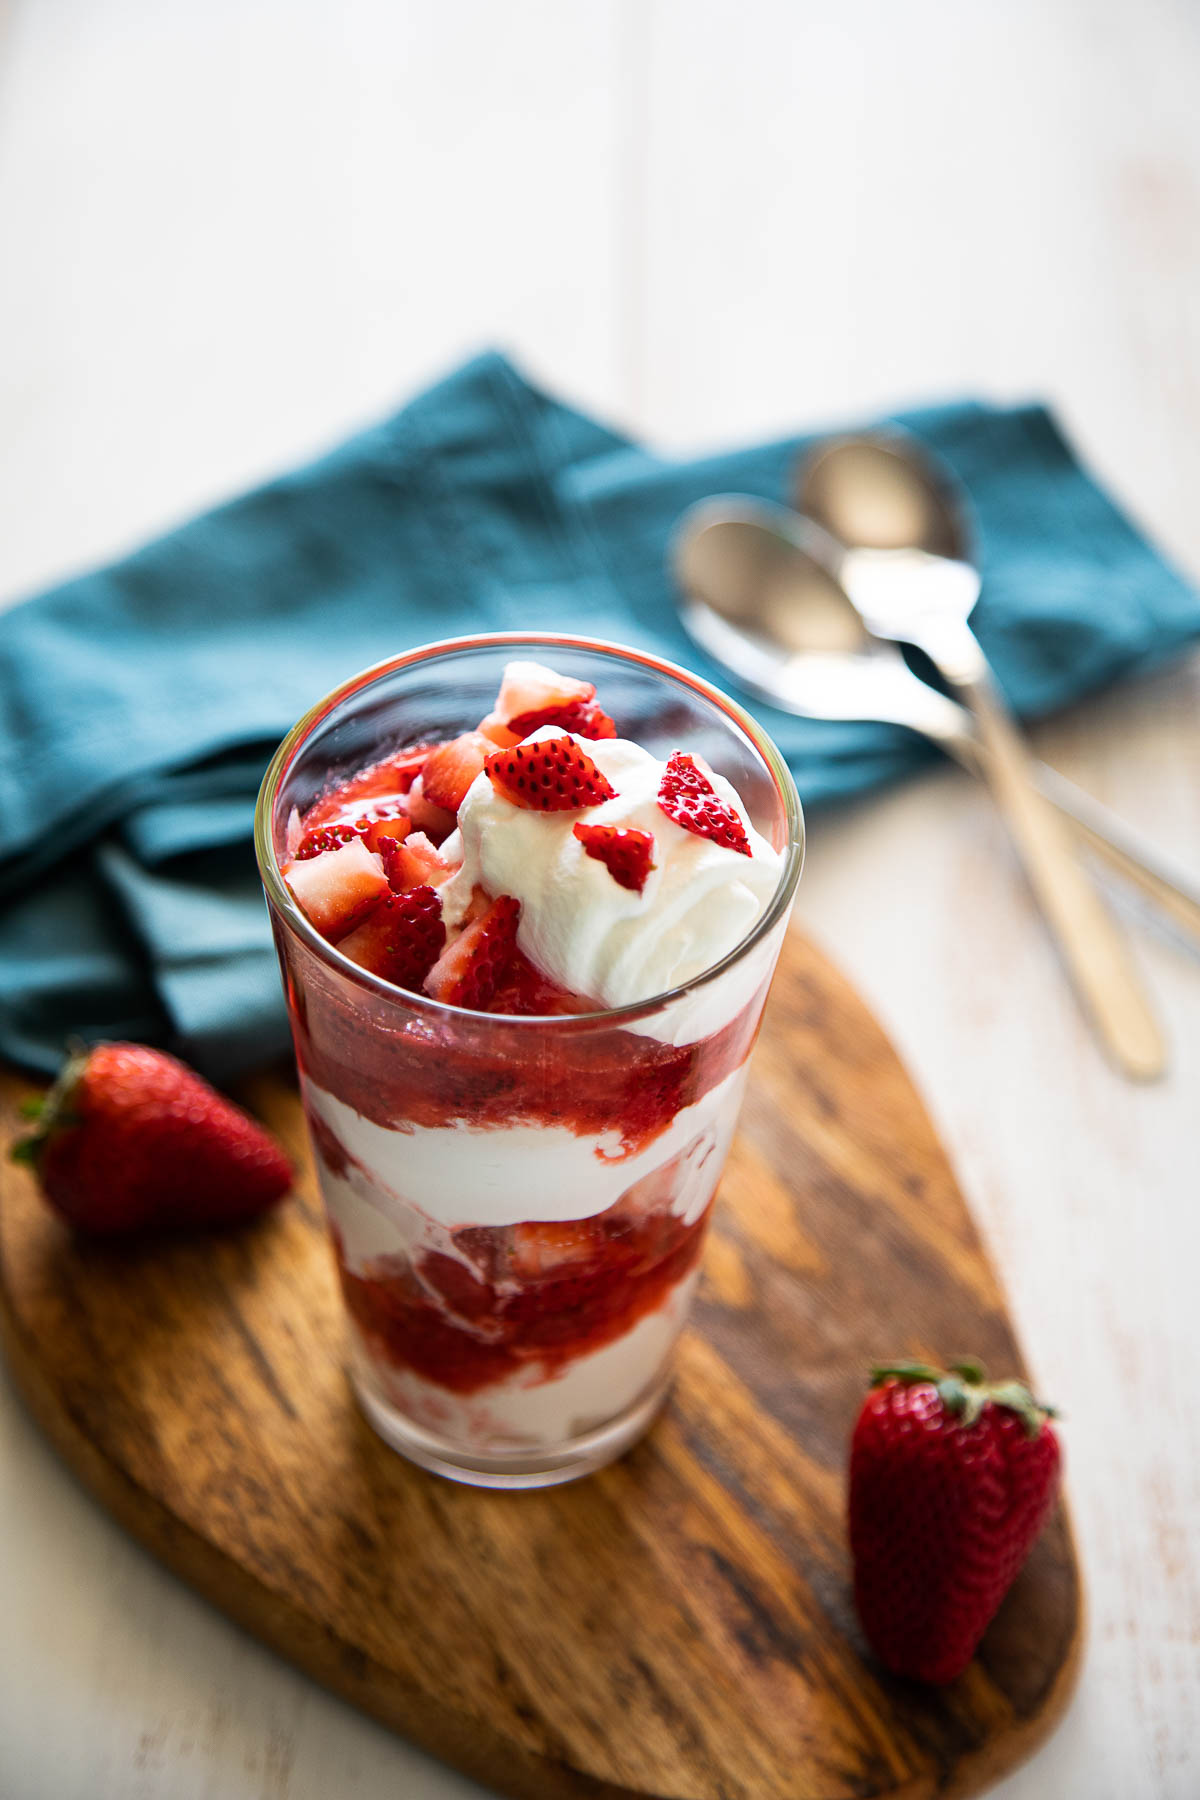 Strawberry Compote Sundae Layered in Pint Glass